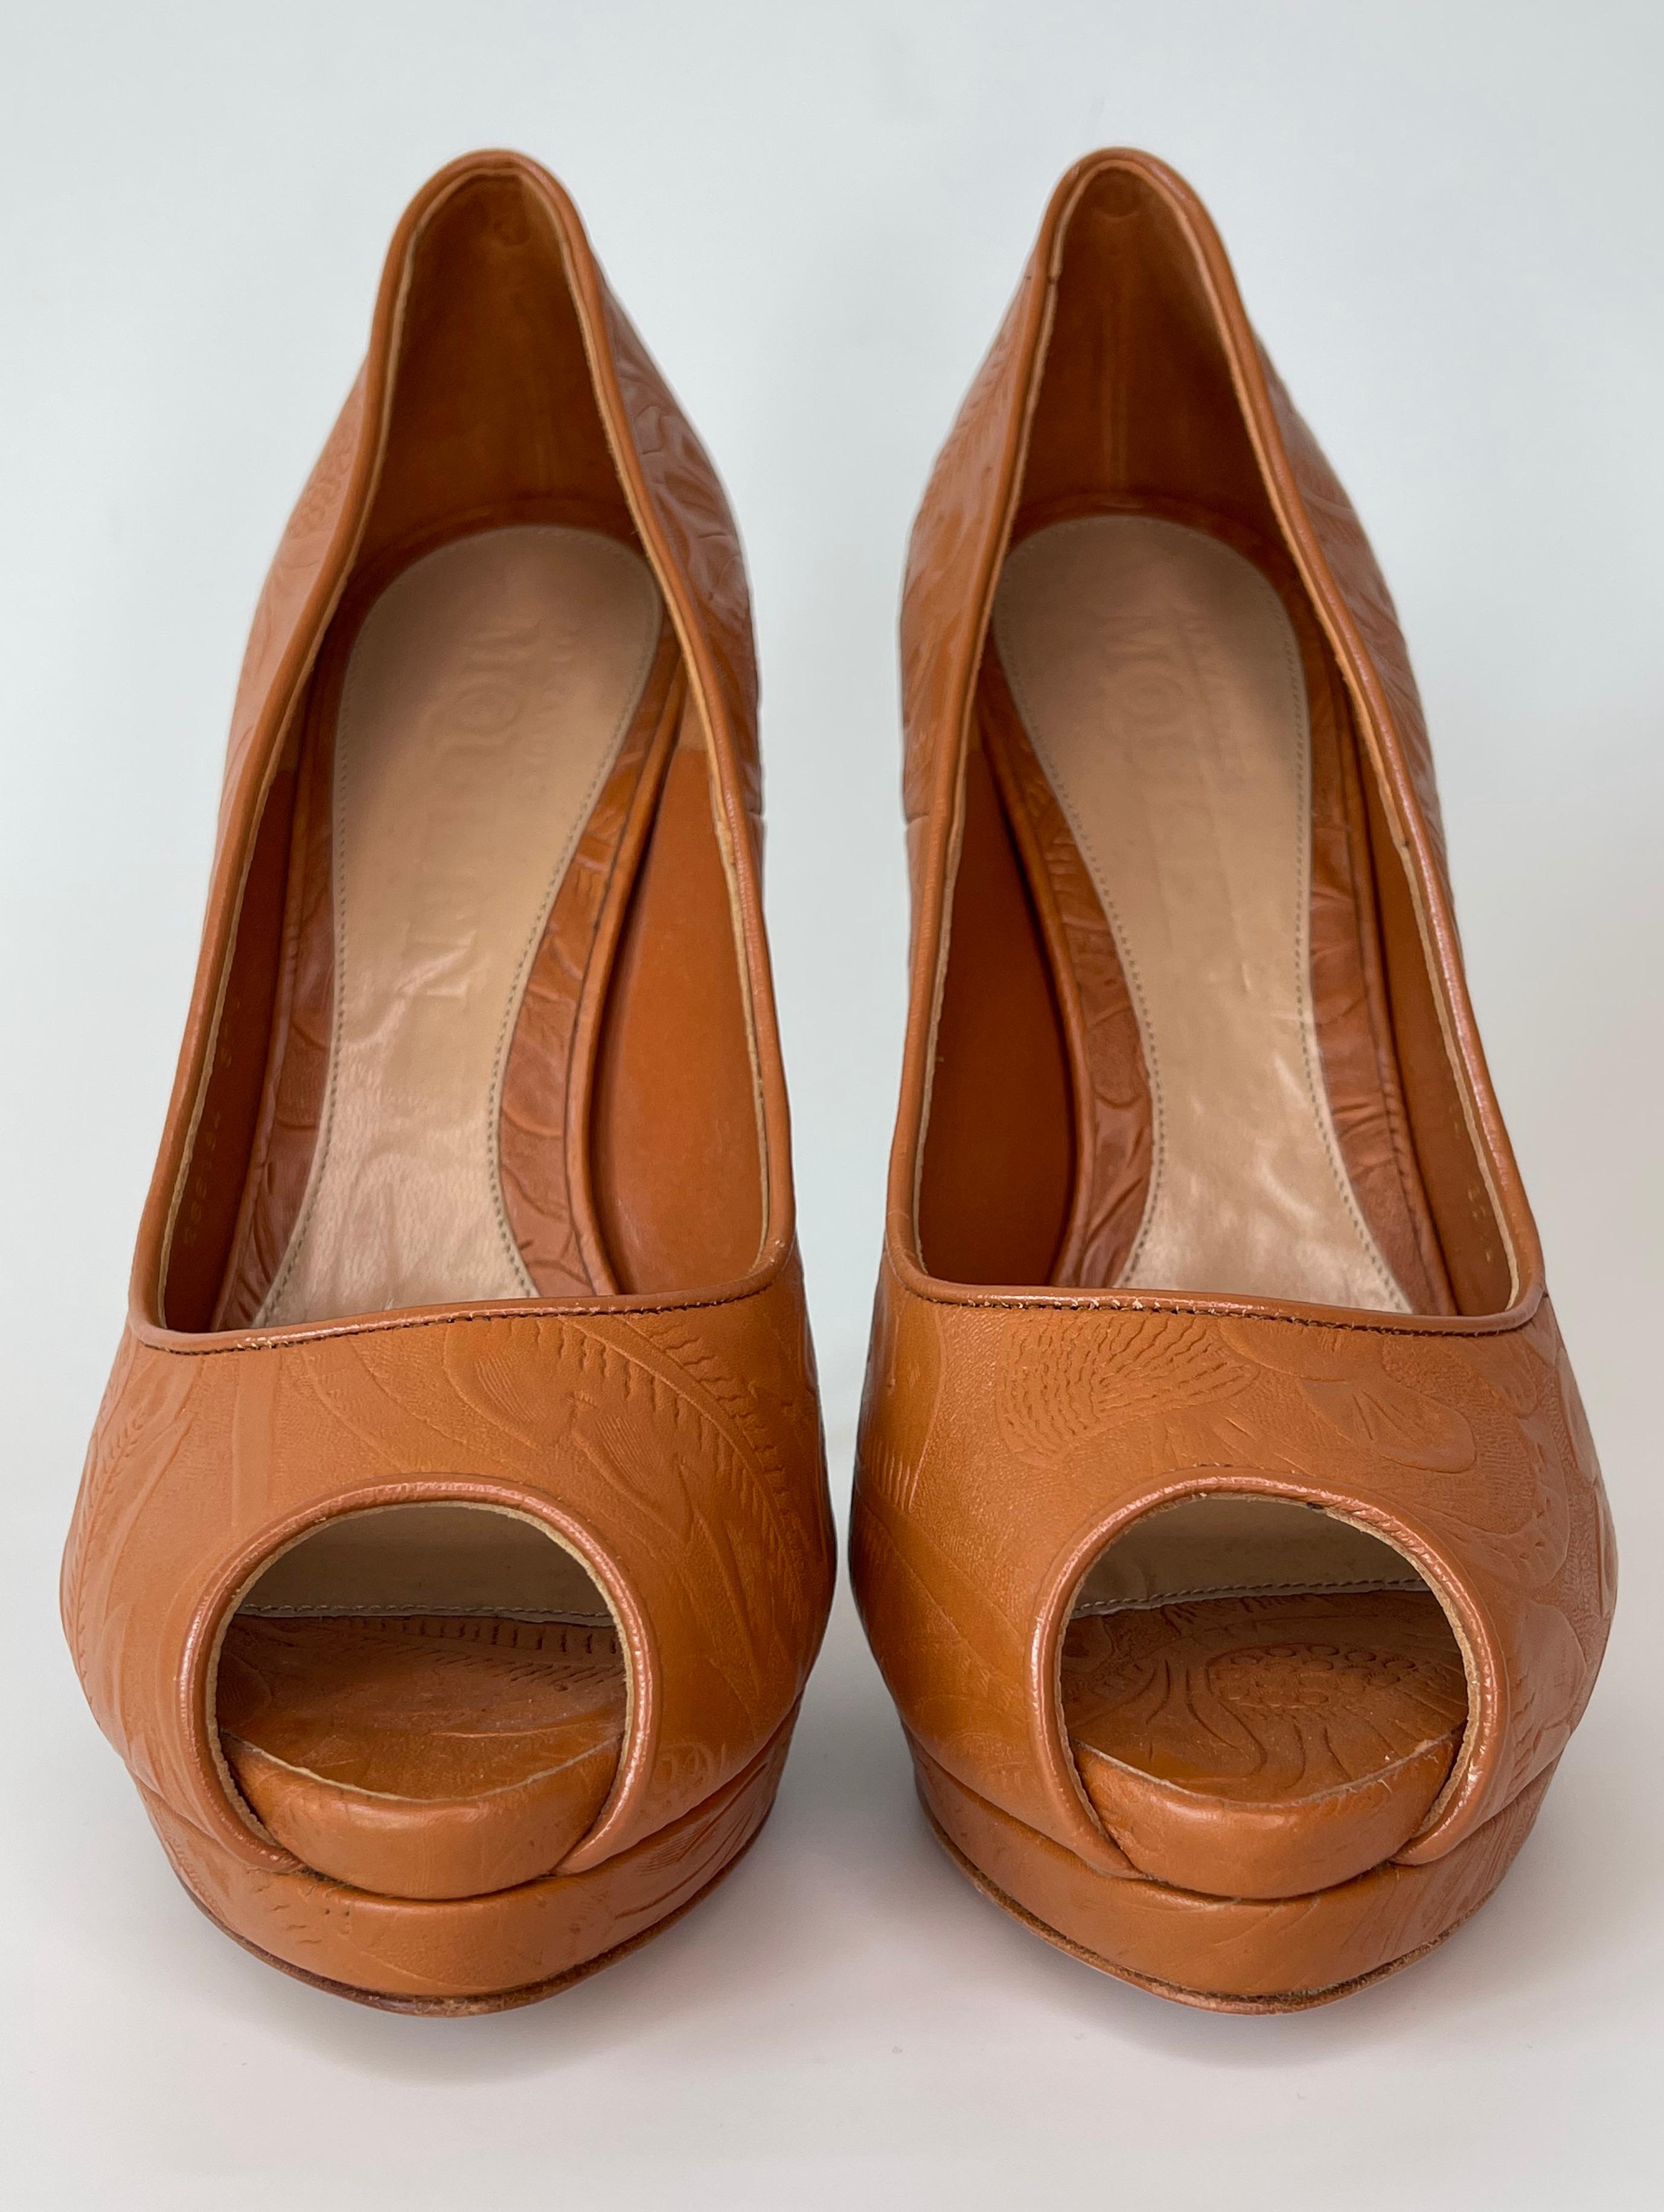 COLOR: Brandy (mixture of orange and brown)
MATERIAL: Leather with wood heel
ITEM CODE: 266184
SIZE: 37.5 EU / 6.5 US
HEEL HEIGHT: 147 mm (5.8 in)
COMES WITH: Original box 
CONDITION: Excellent - strong shoes with minimal sings of wear consistent